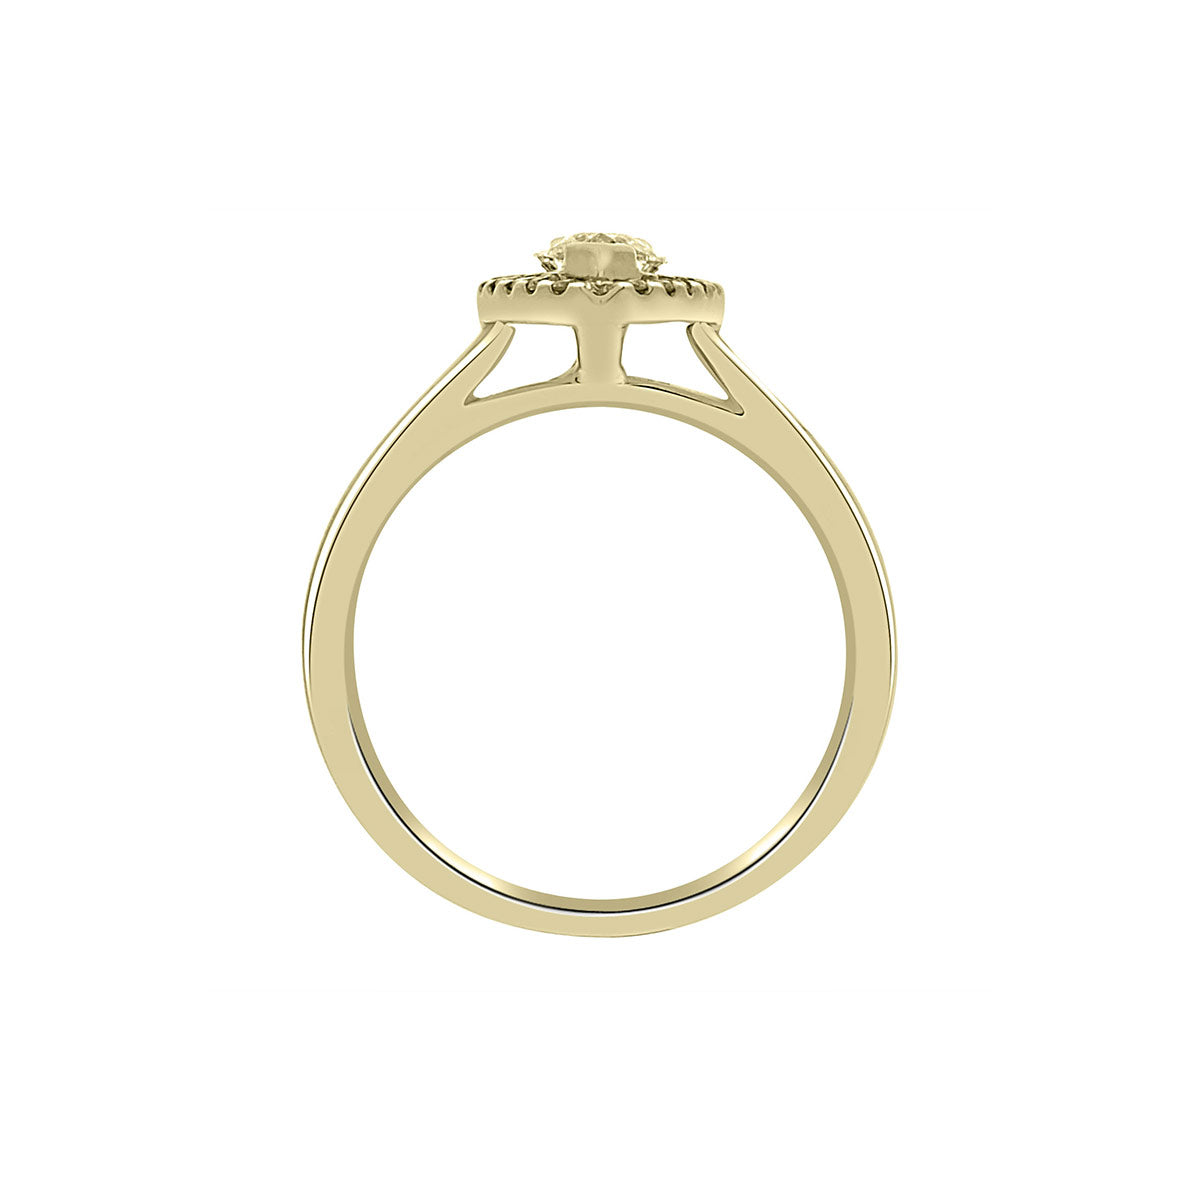 Marquise Cut Halo Ring in yellow gold in an upright position